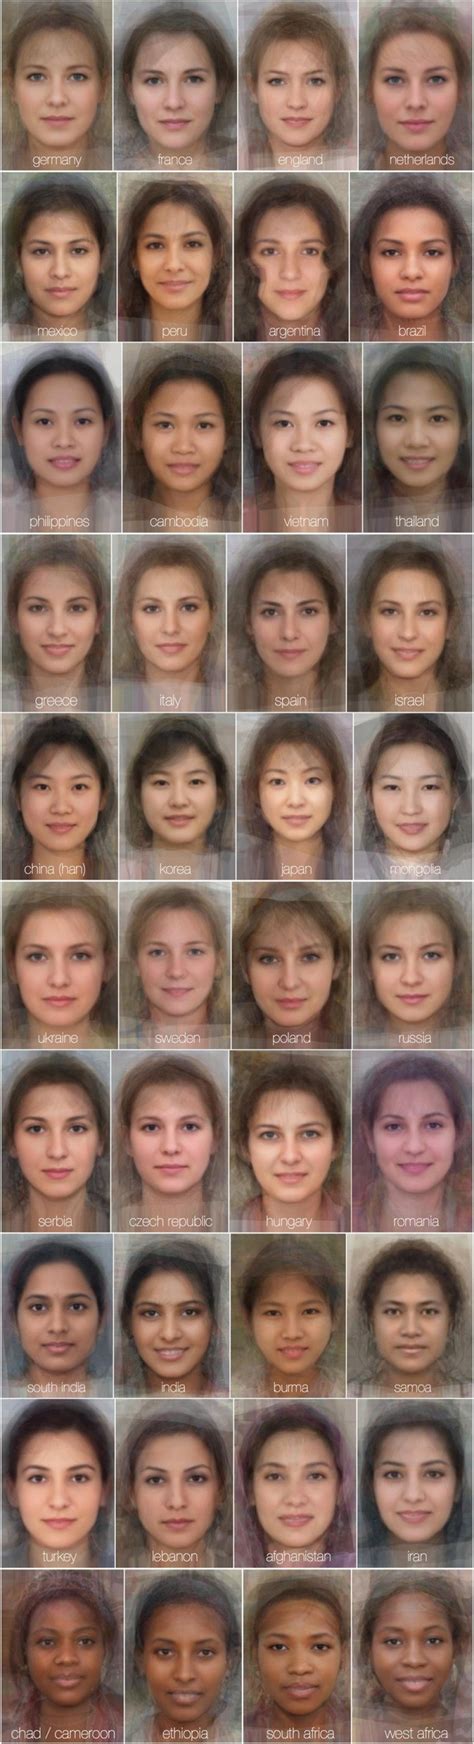 Womens Average Faces By Country By Collin Spears With